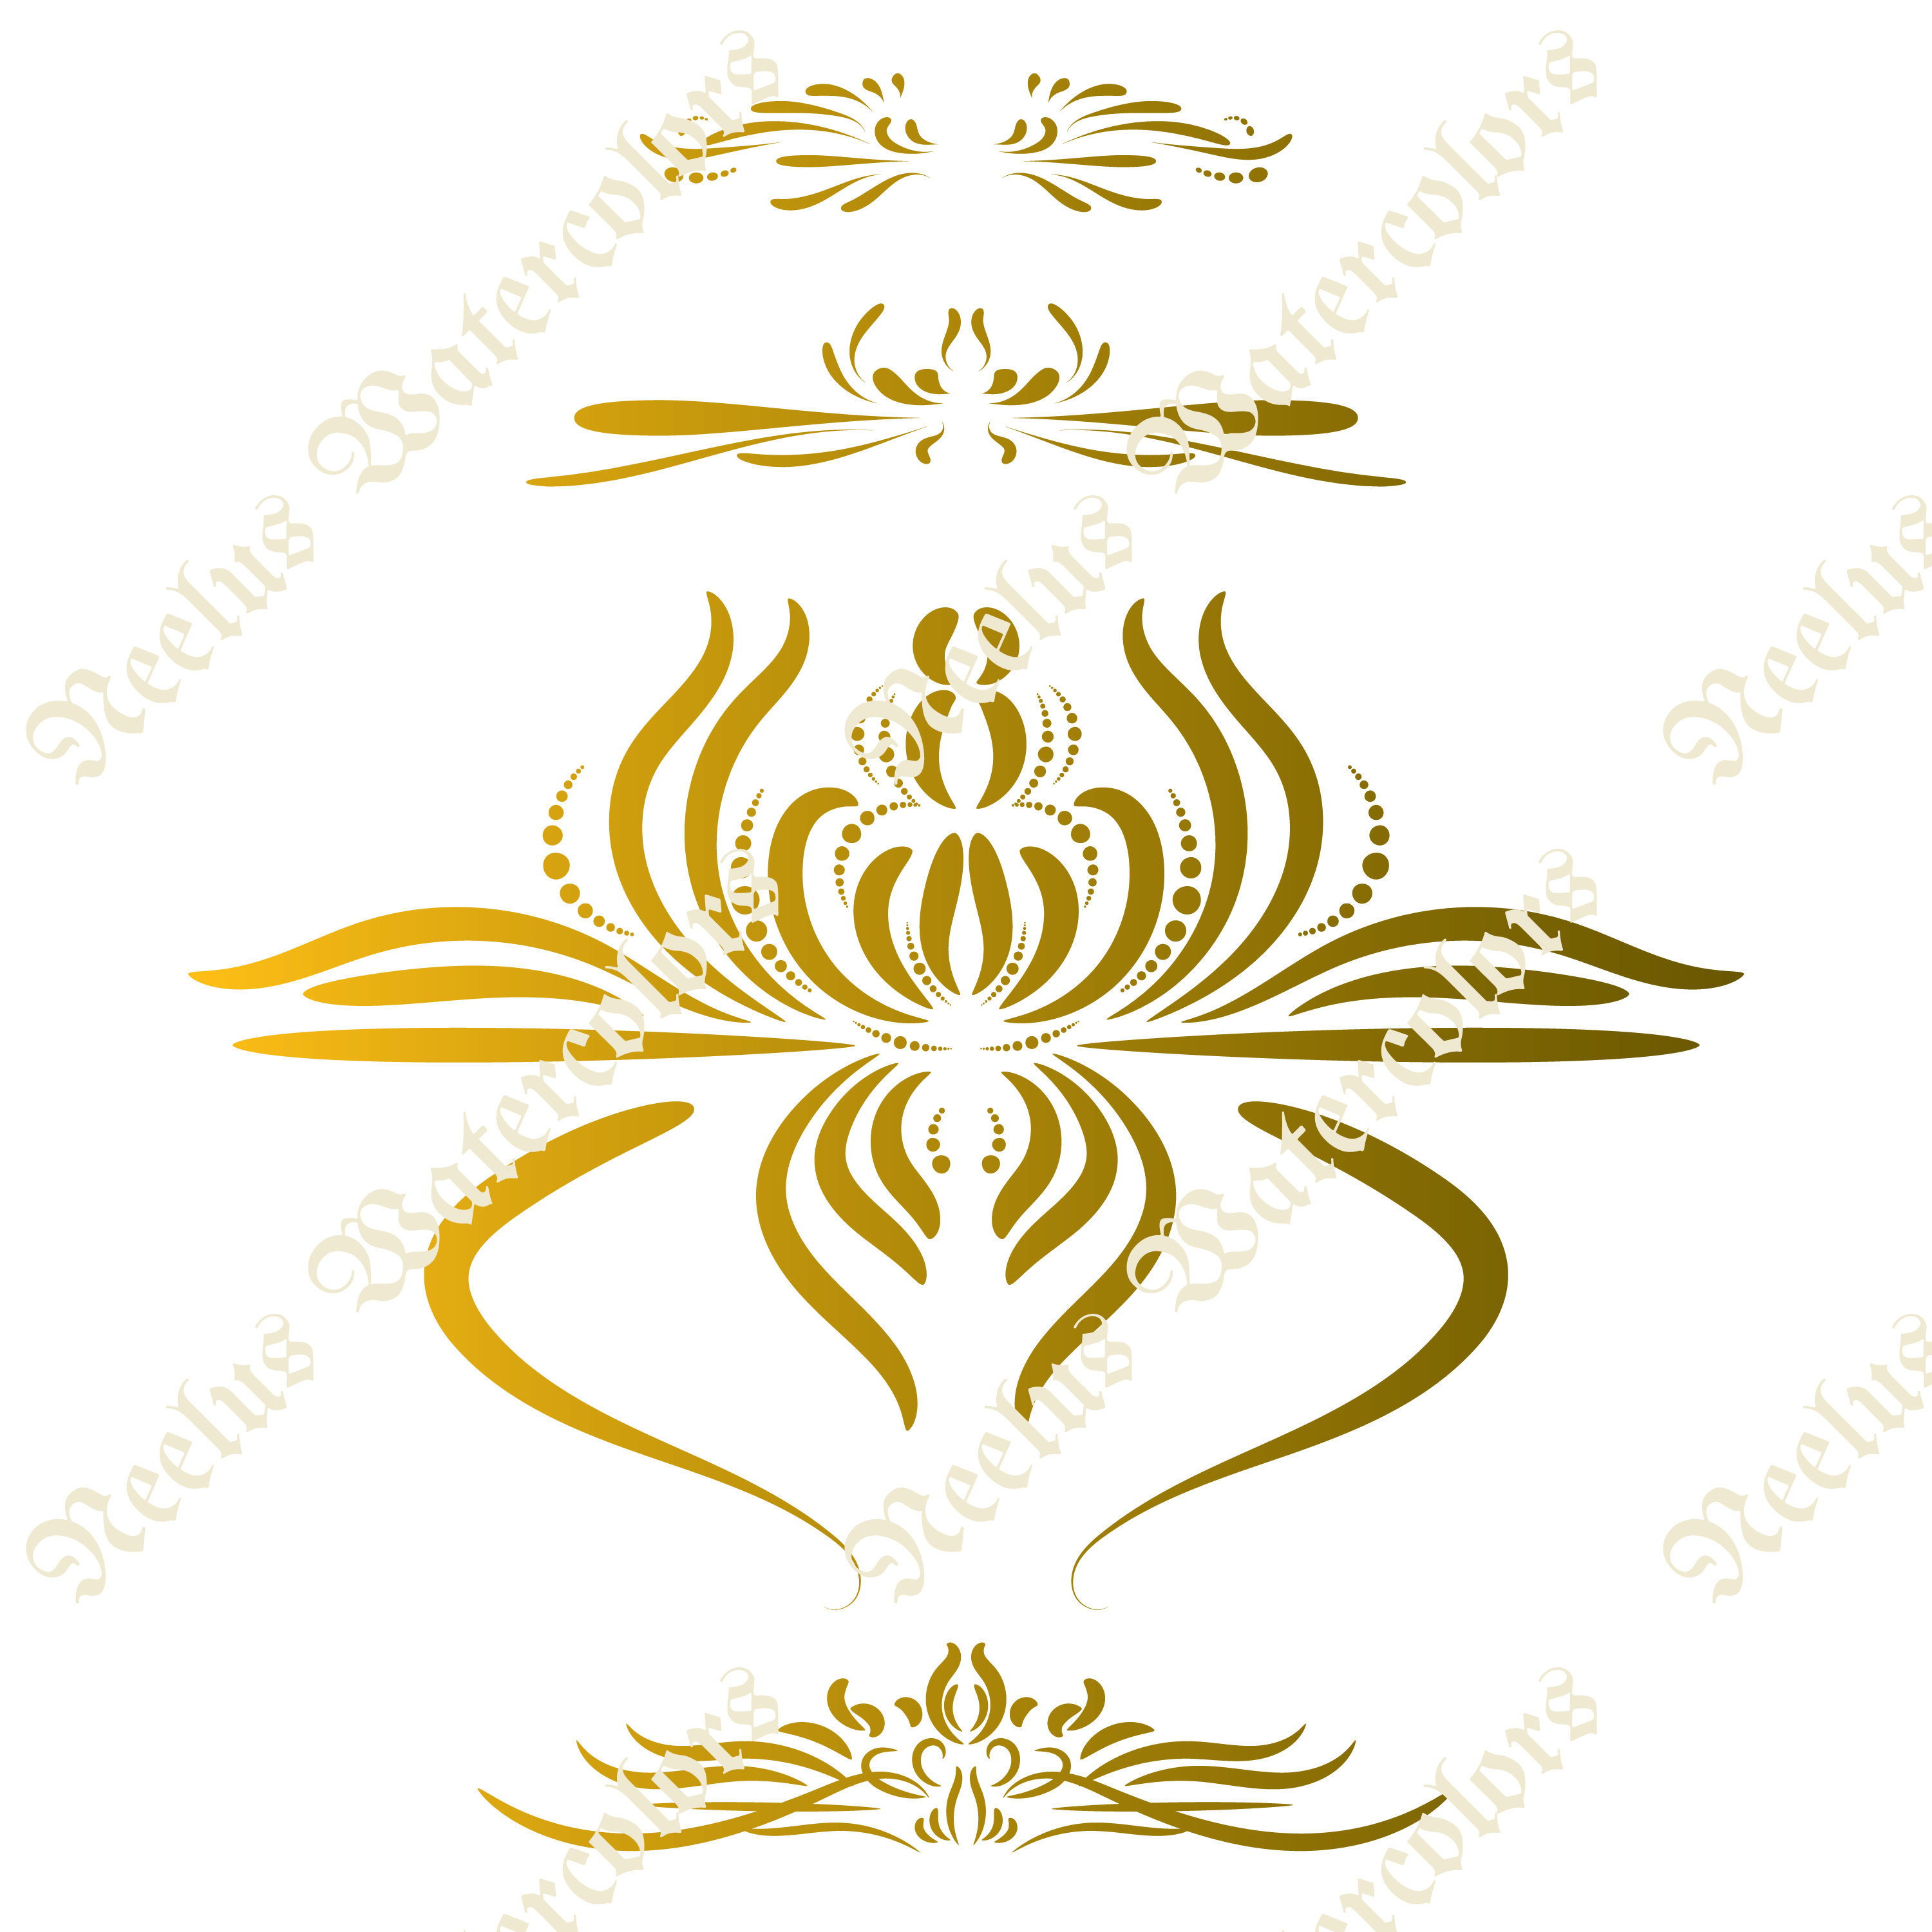 Border design elements in gold and copper